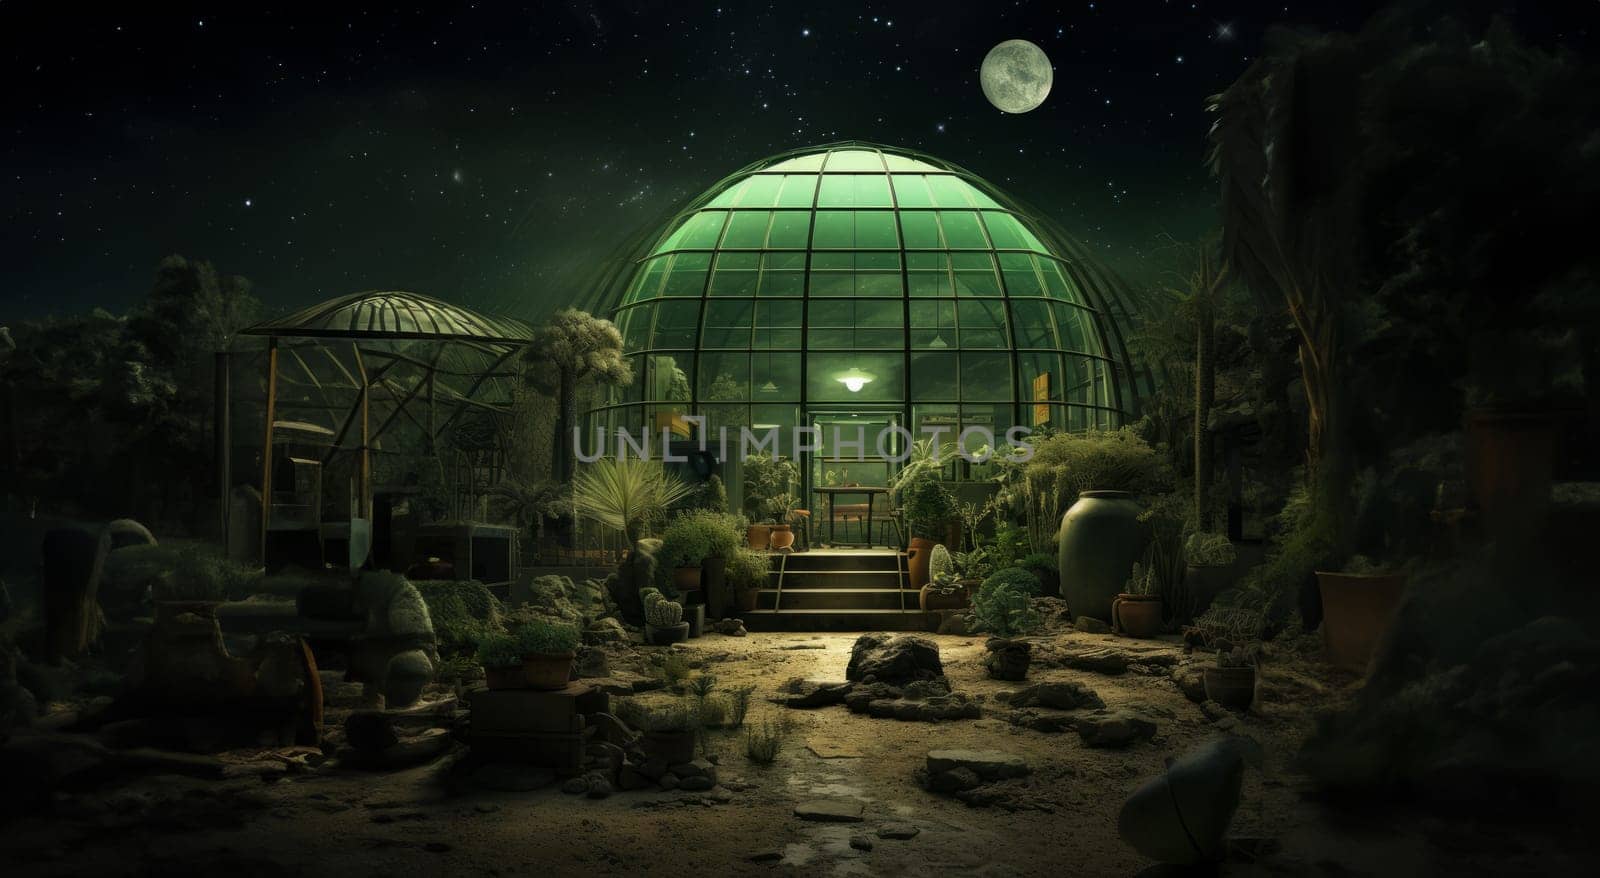 Within a glass-enclosed chamber on Mars, a pioneering space greenhouse cultivates earthly sustenance, showcasing the integration of advanced technology and sustainable practices for extraterrestrial agriculture in the quest for self-sufficiency on the Red Planet.Generated image by dotshock